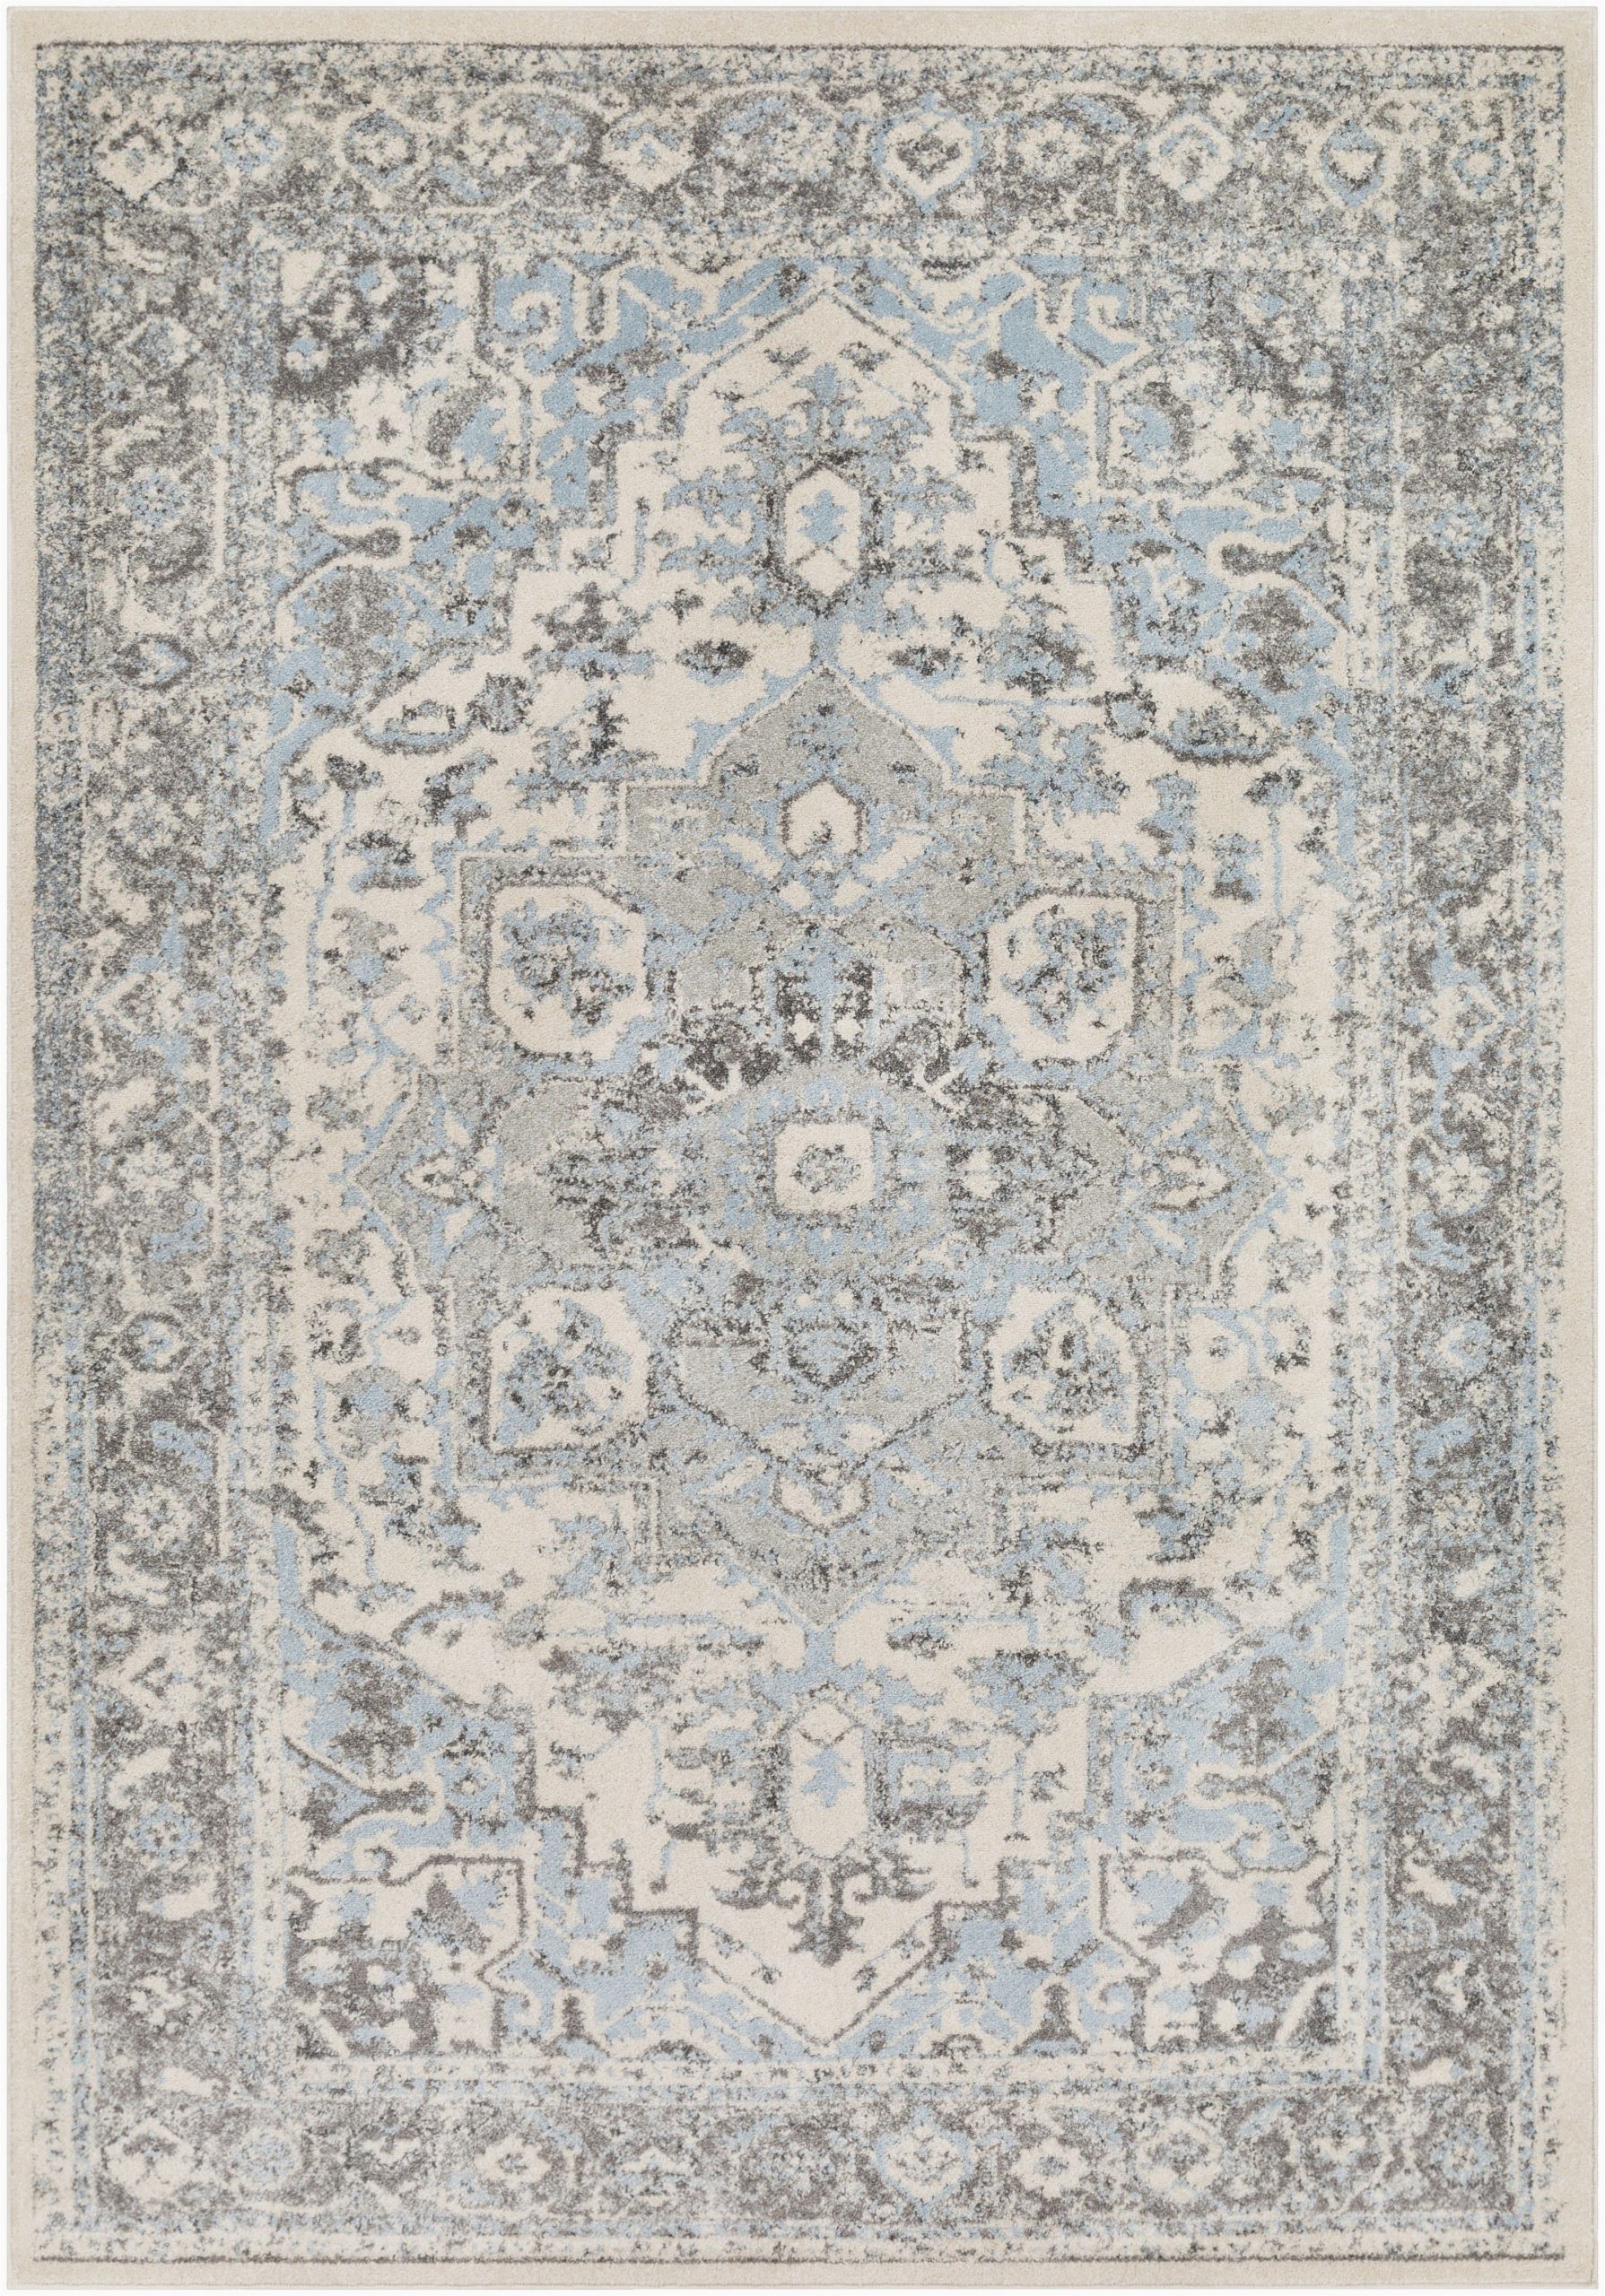 Light Blue and Tan Rug Tan Light Blue and Weathered Gray Make A Delightful Trio